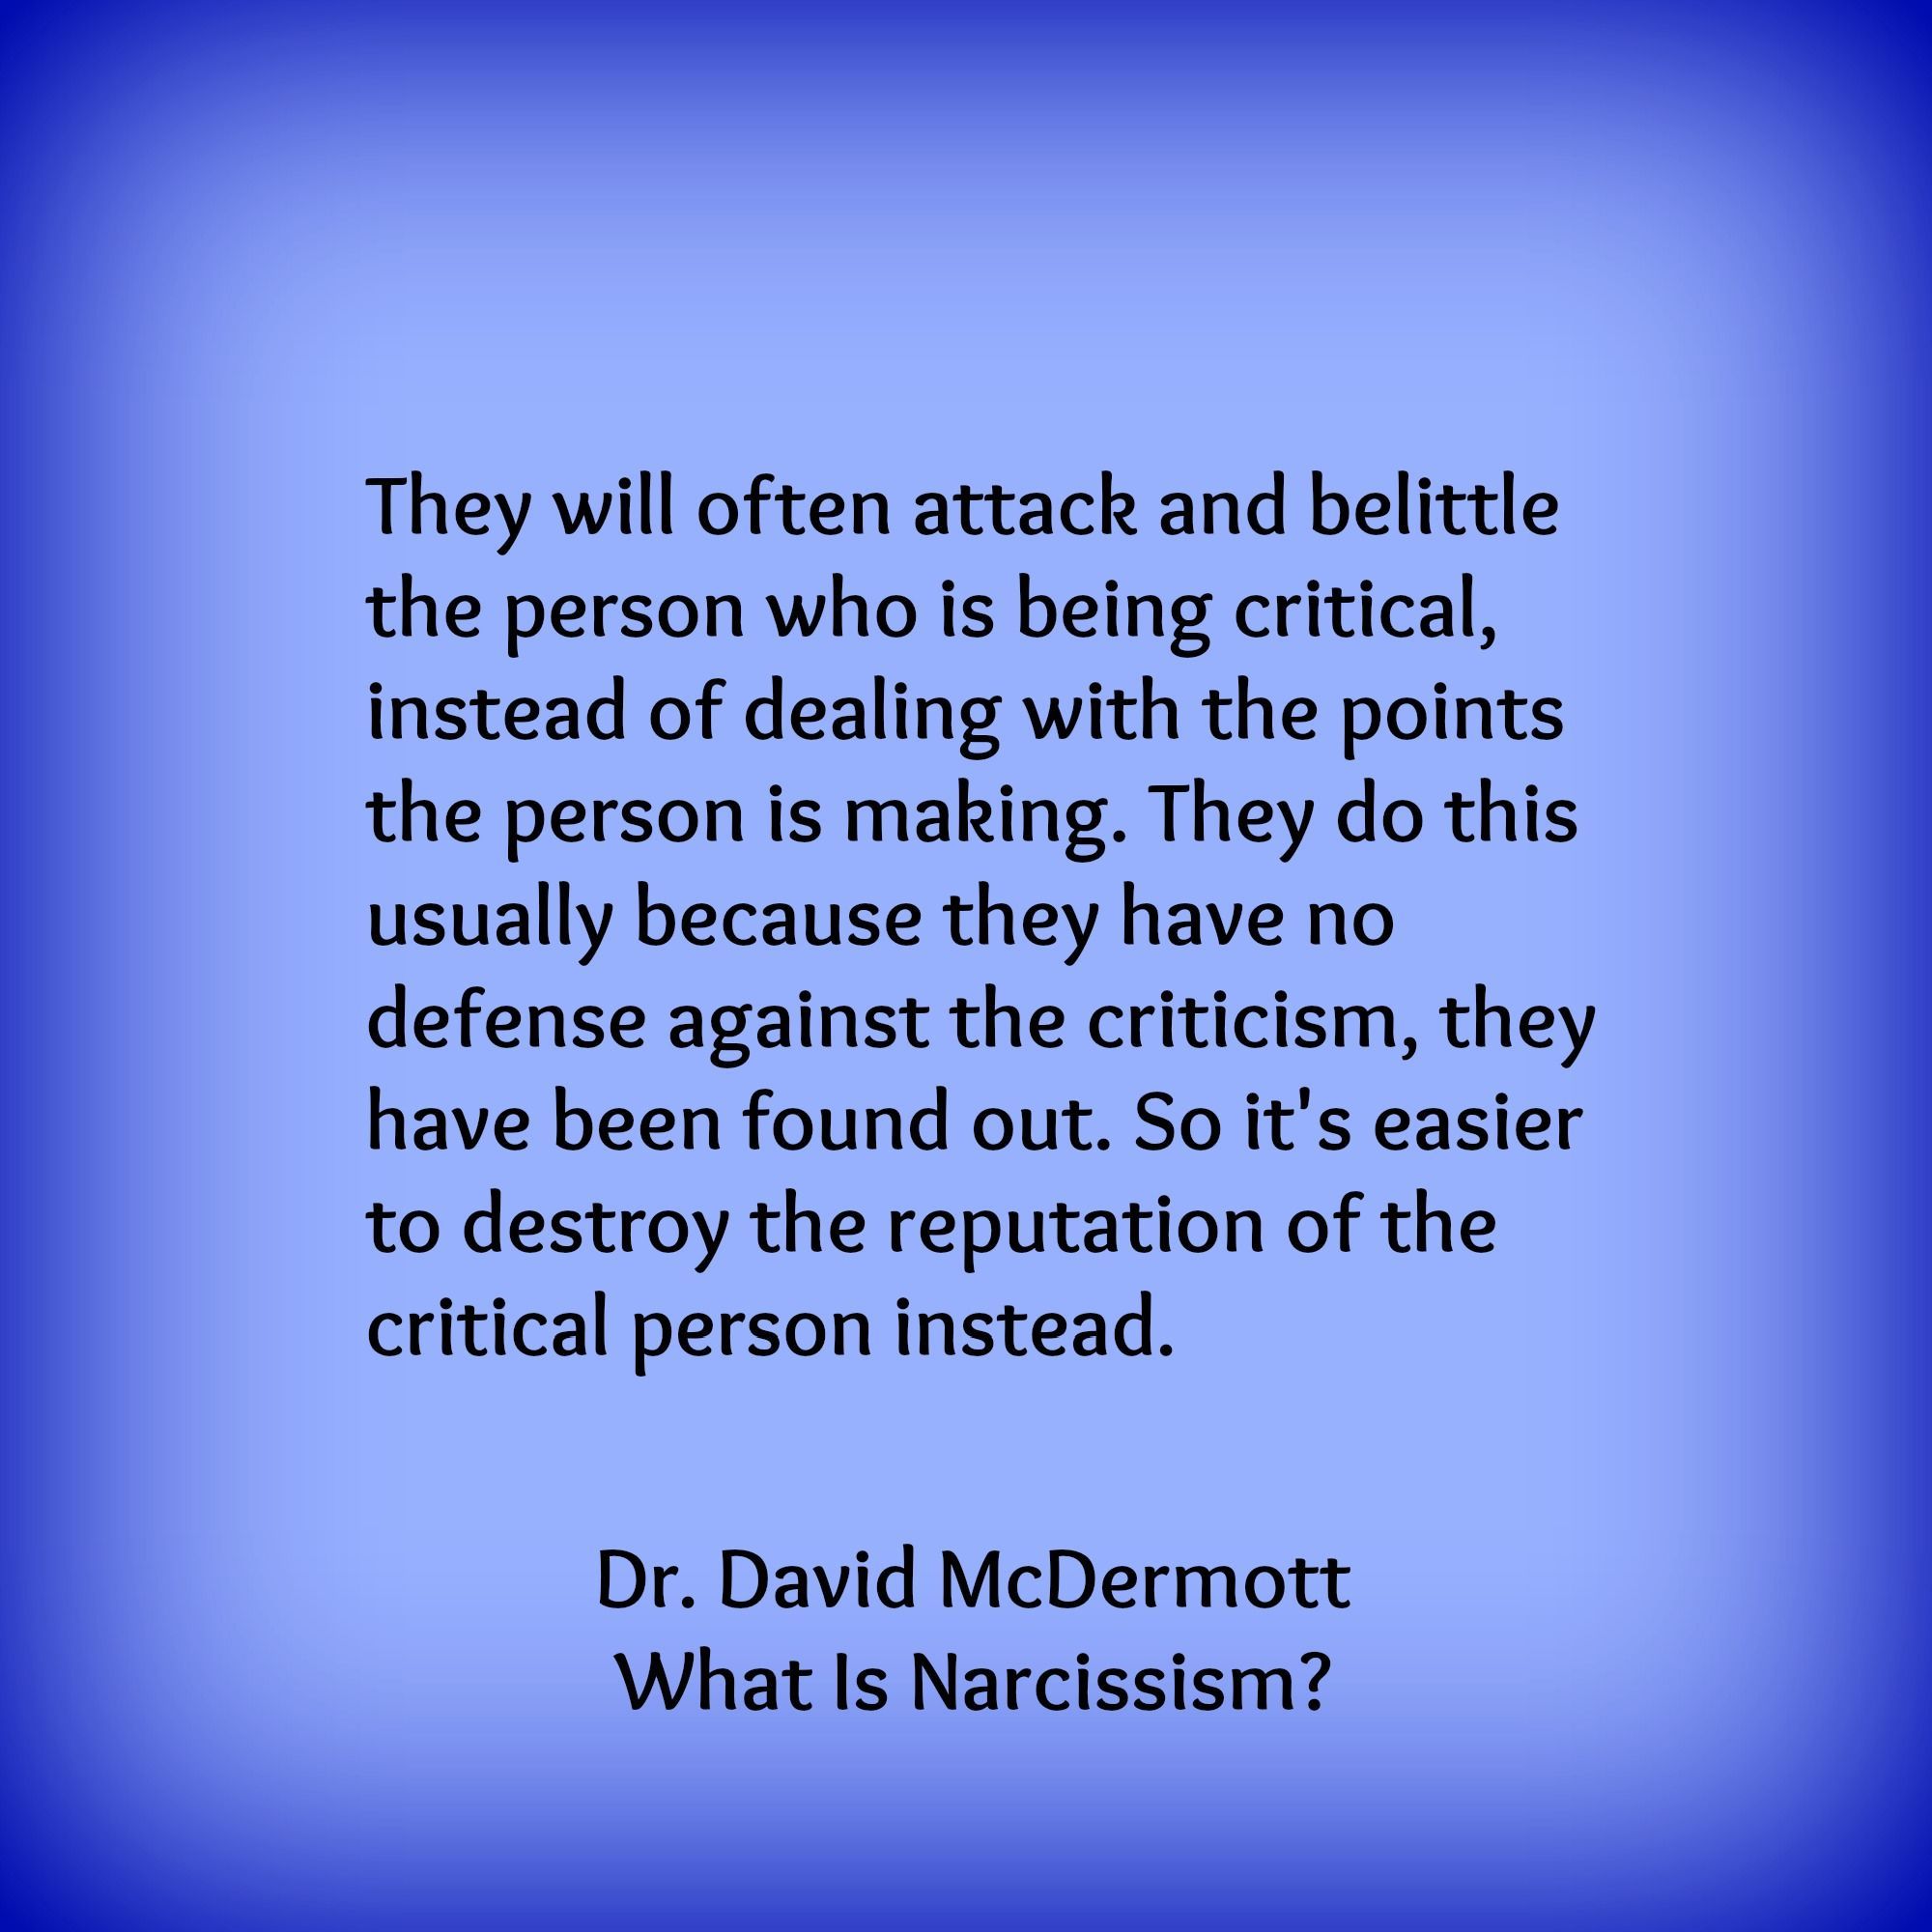 They will often attack and belittle the person who is being critical, instead of dealing with the poin